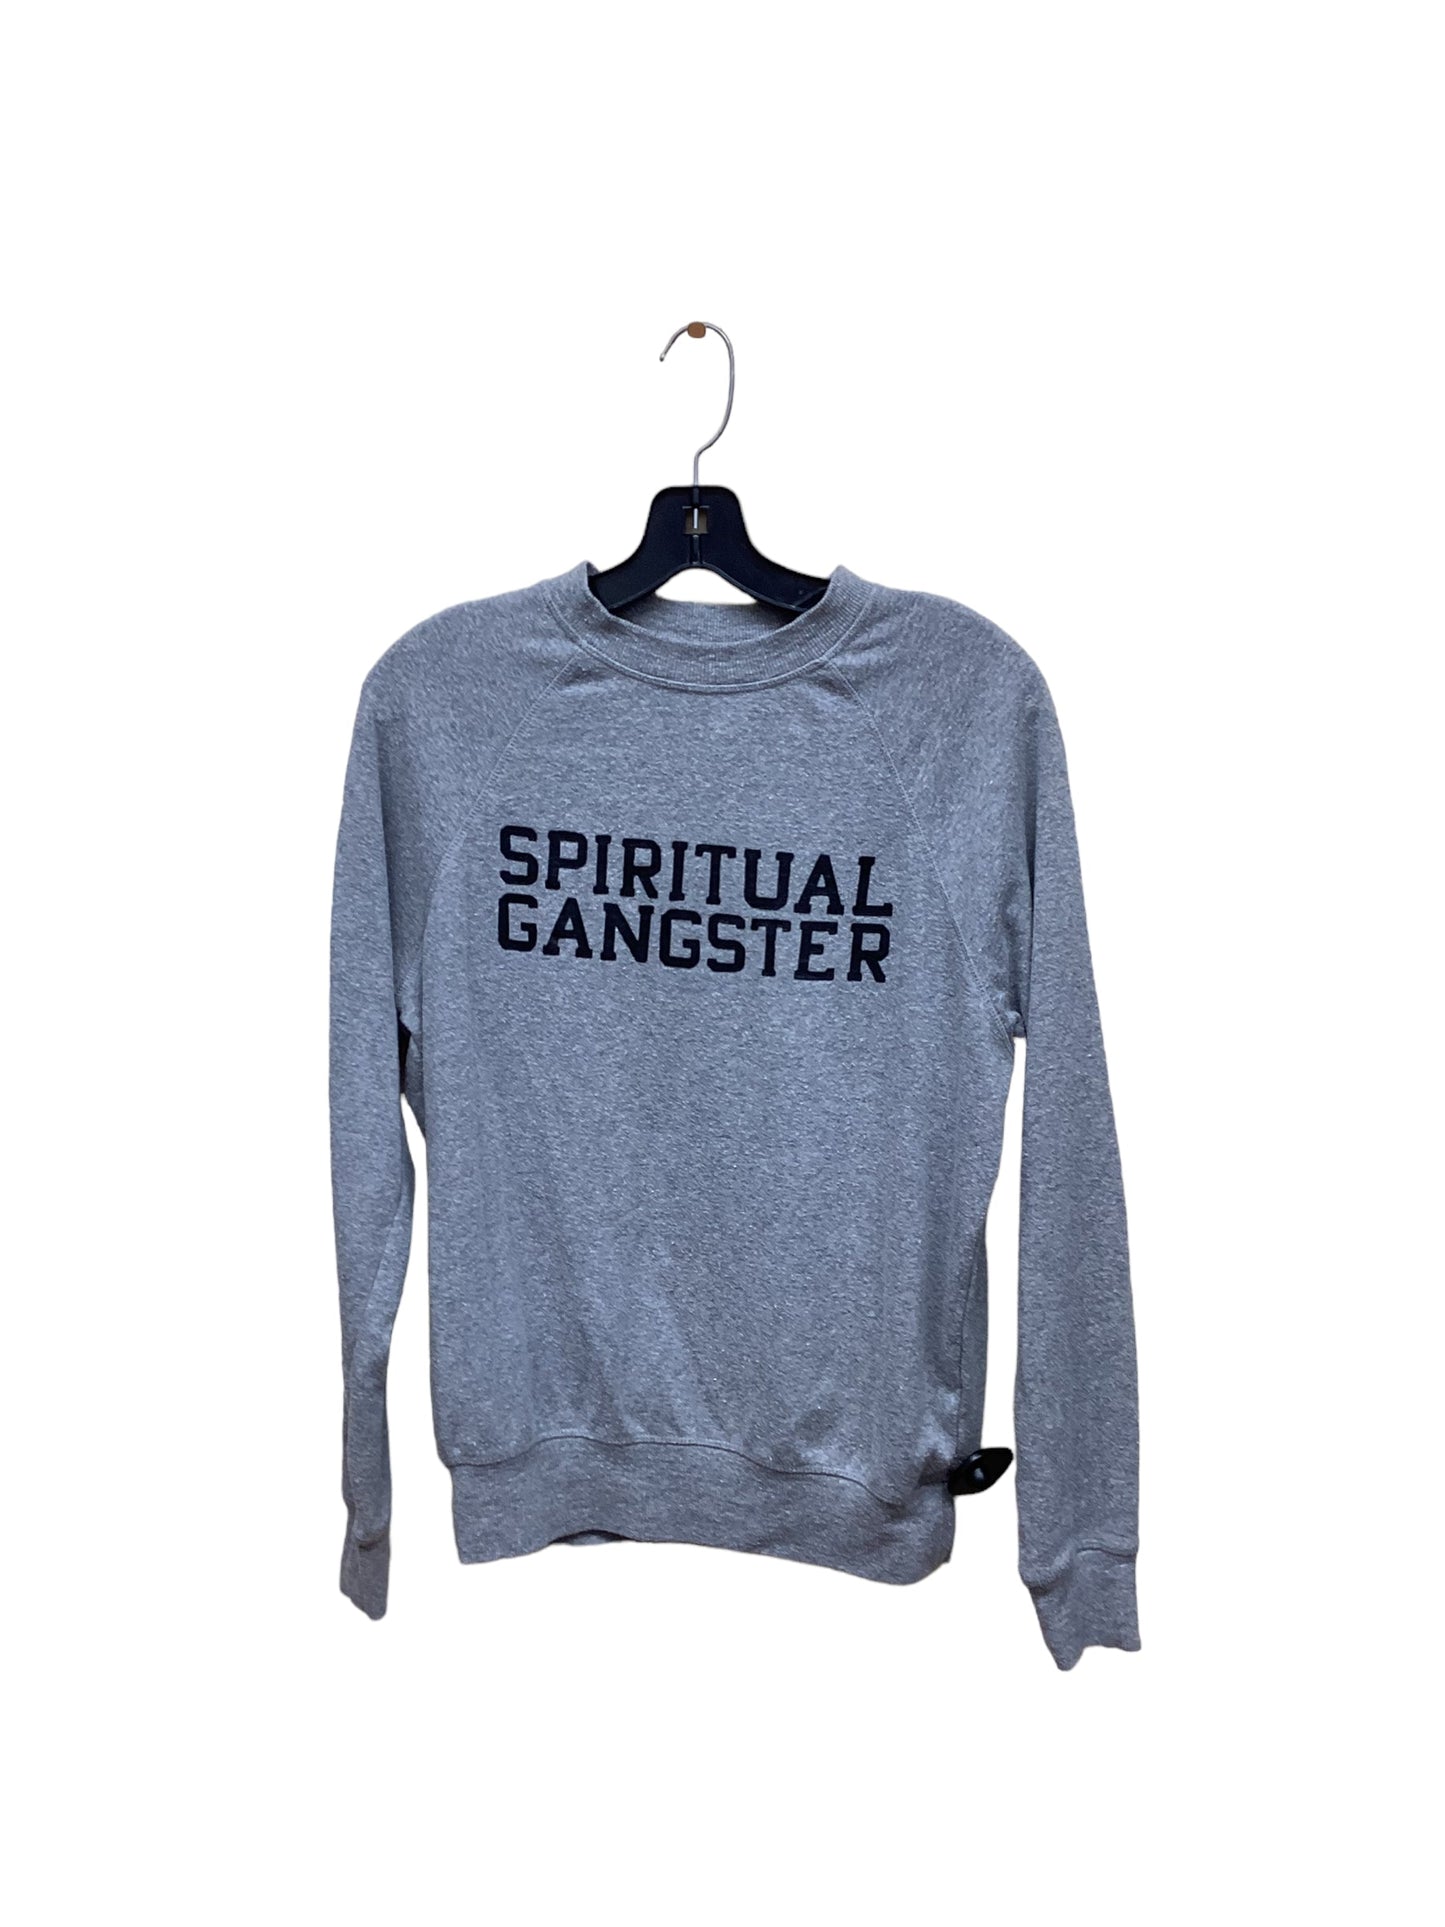 Sweater By Spiritual Gangster  Size: S